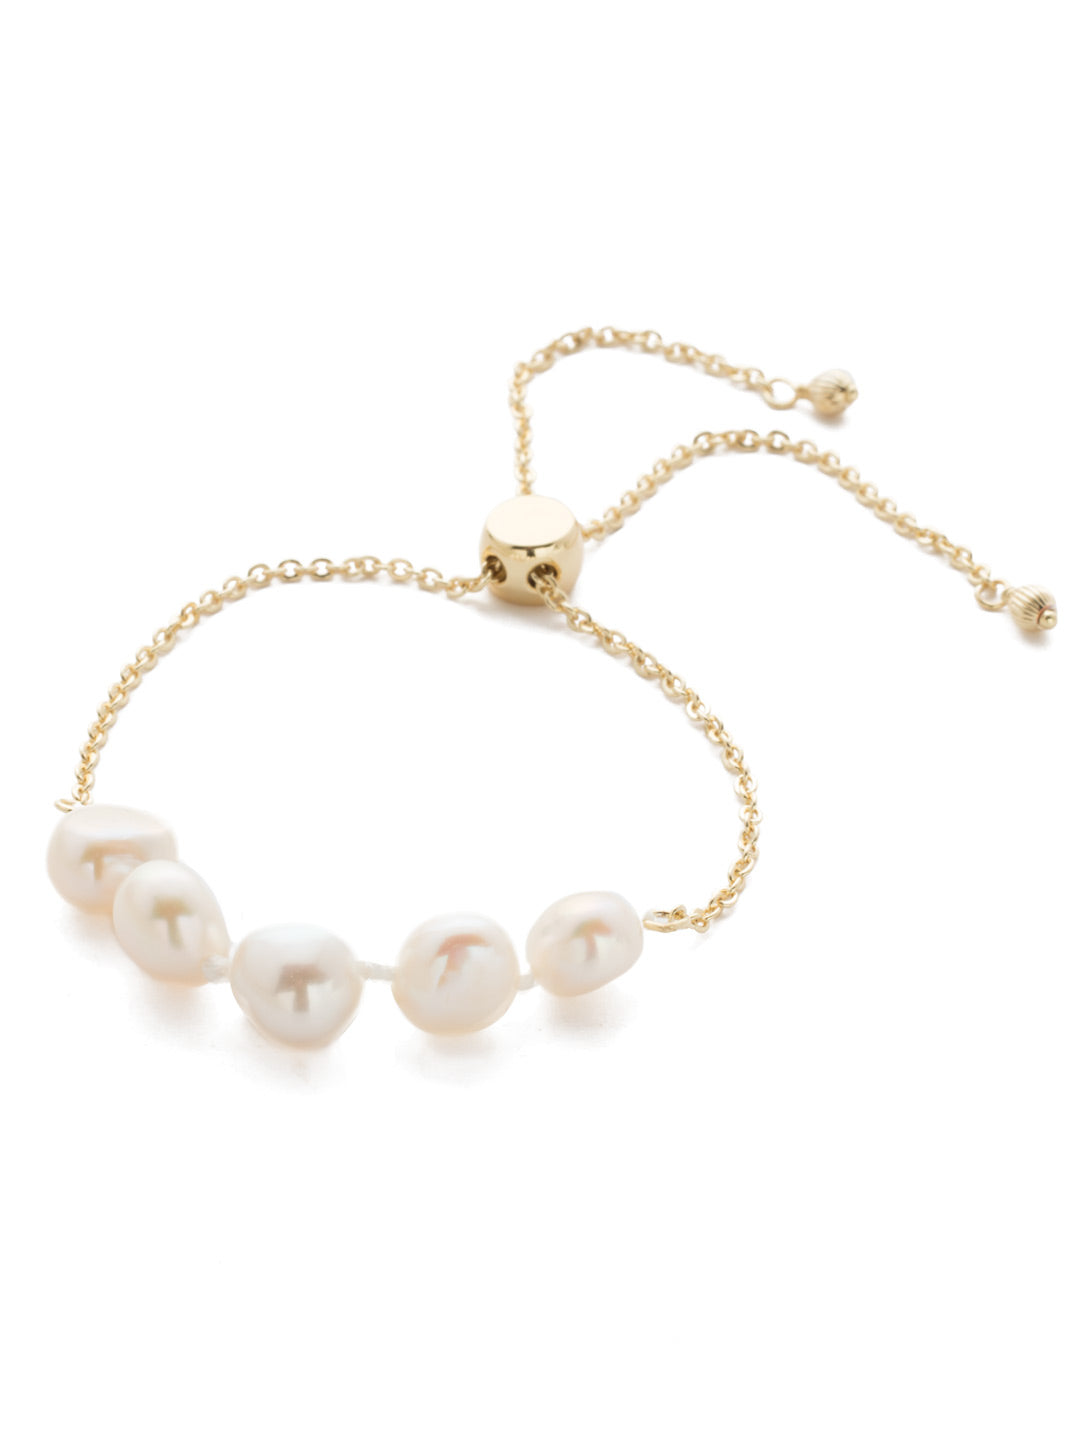 Celeste Slider Bracelet - 4BEF2BGMDP - <p>A must-wear for any wrist, this adjustable classic features a delicate chain accented by freshwater pearls. From Sorrelli's Modern Pearl collection in our Bright Gold-tone finish.</p>